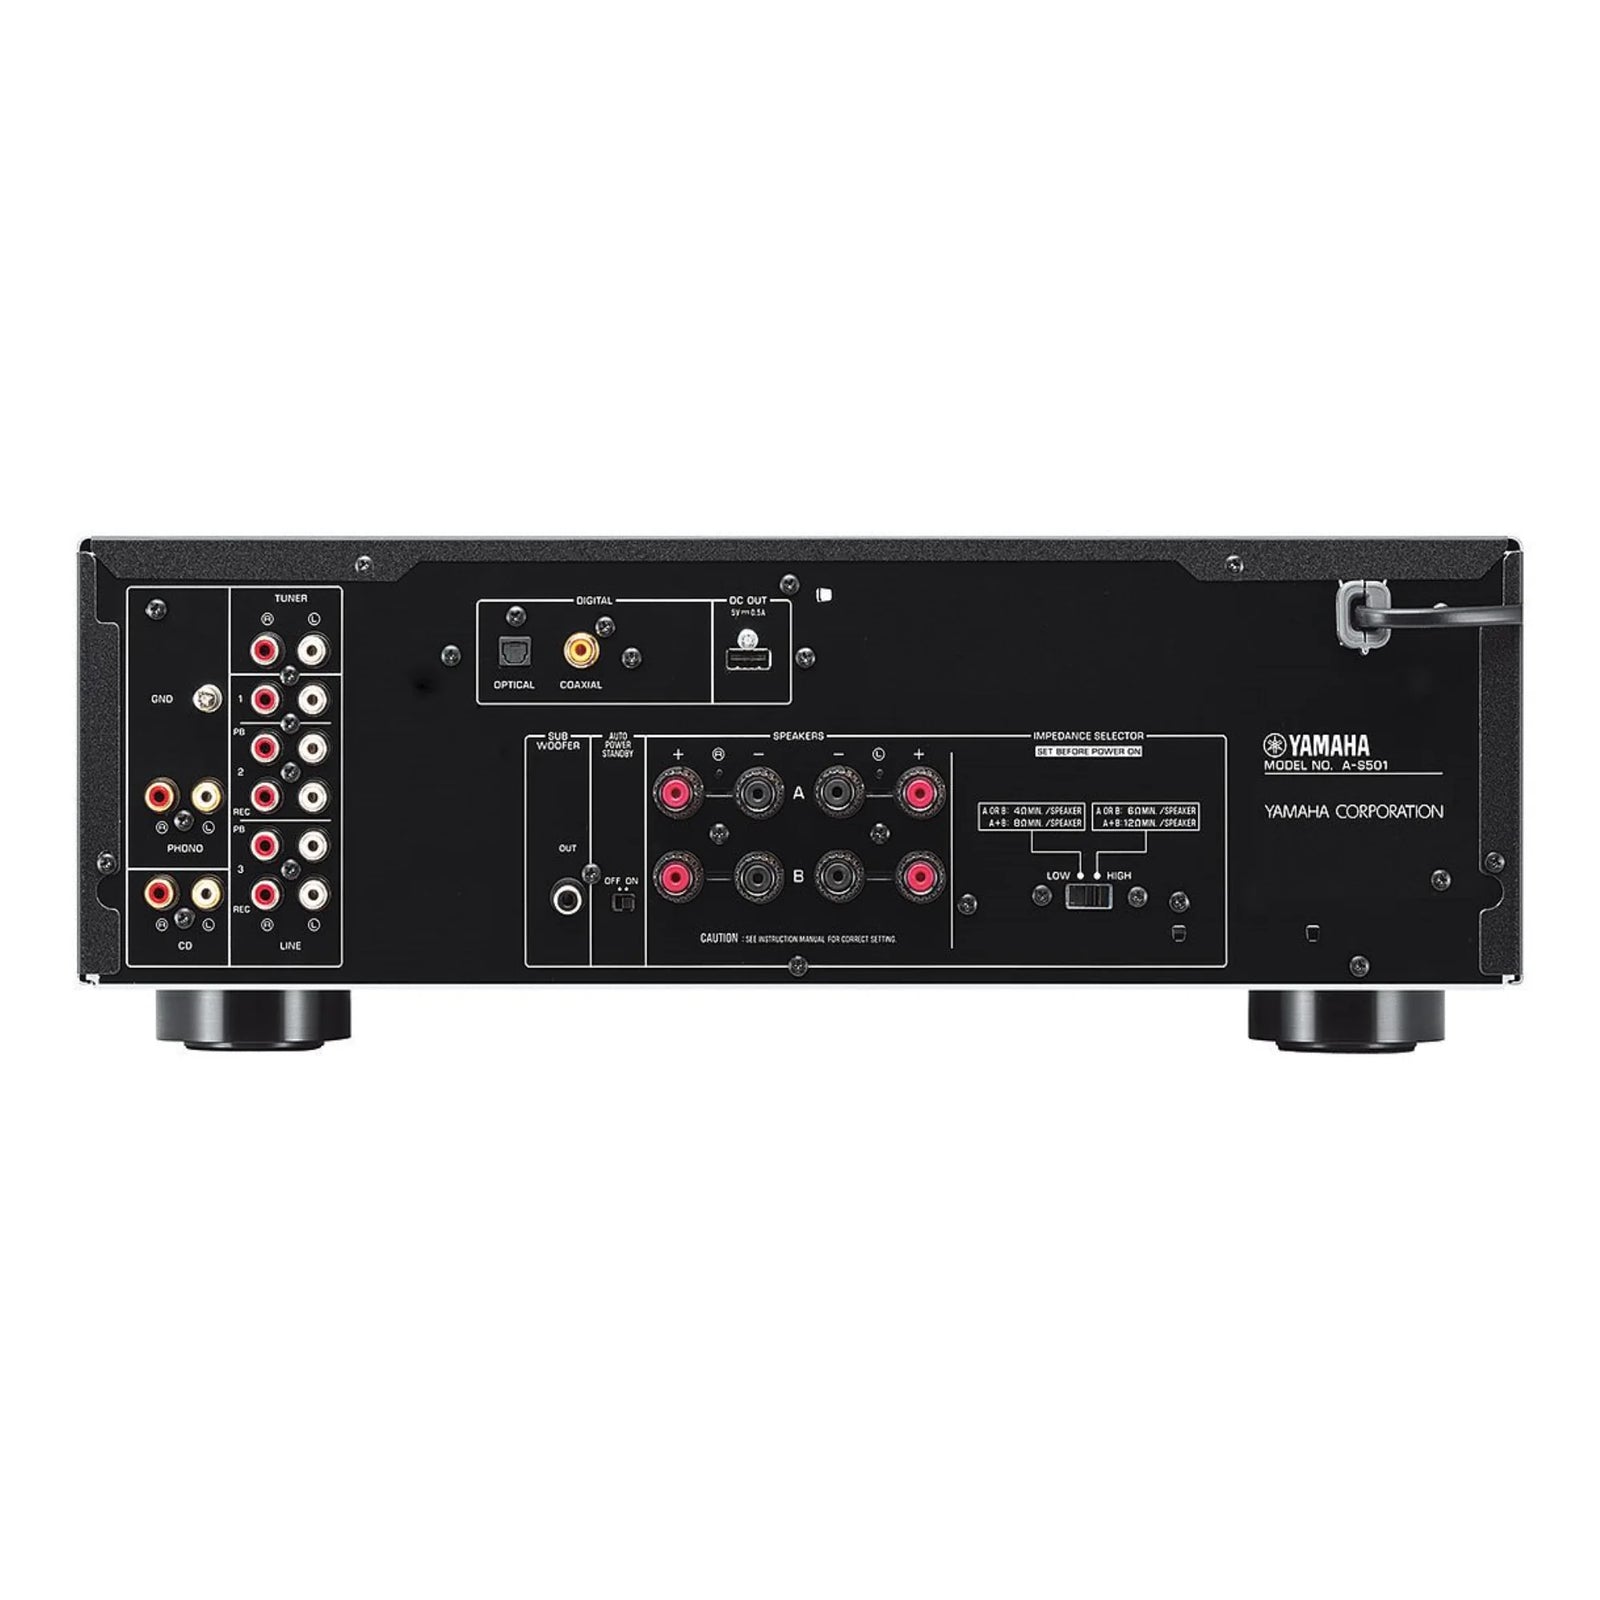 Yamaha A-S501 - Integrated Amplifiers Impressively high sound quality with a wide range of features and an elegant appearance. An integrated amplifier with the advantage of digital input.